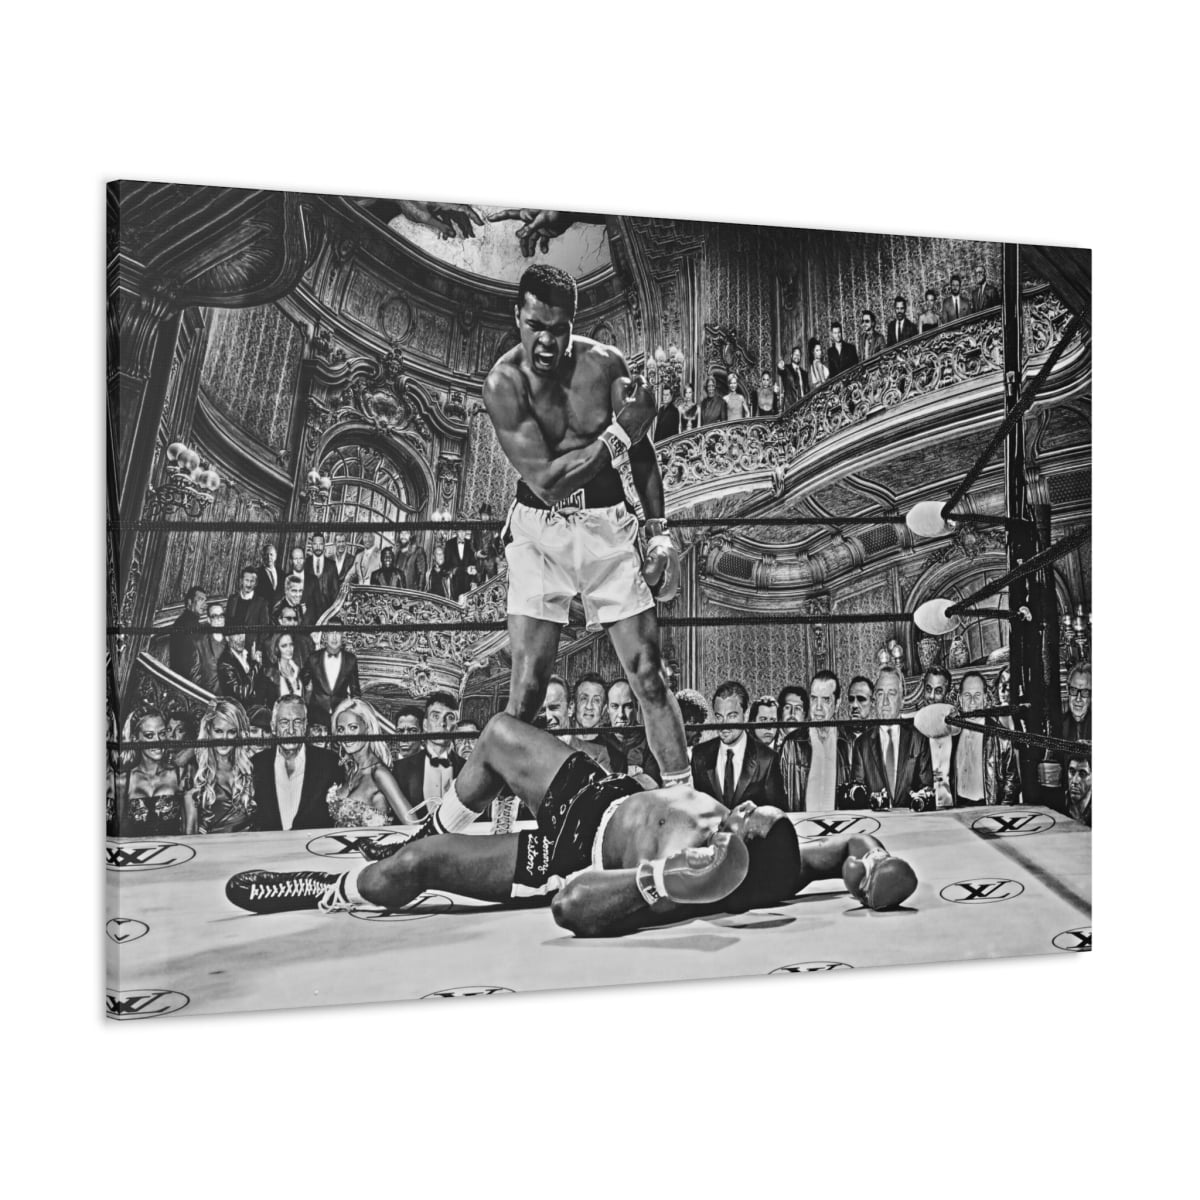 Own Greatness: Muhammad Ali Canvas Gallery Wrap